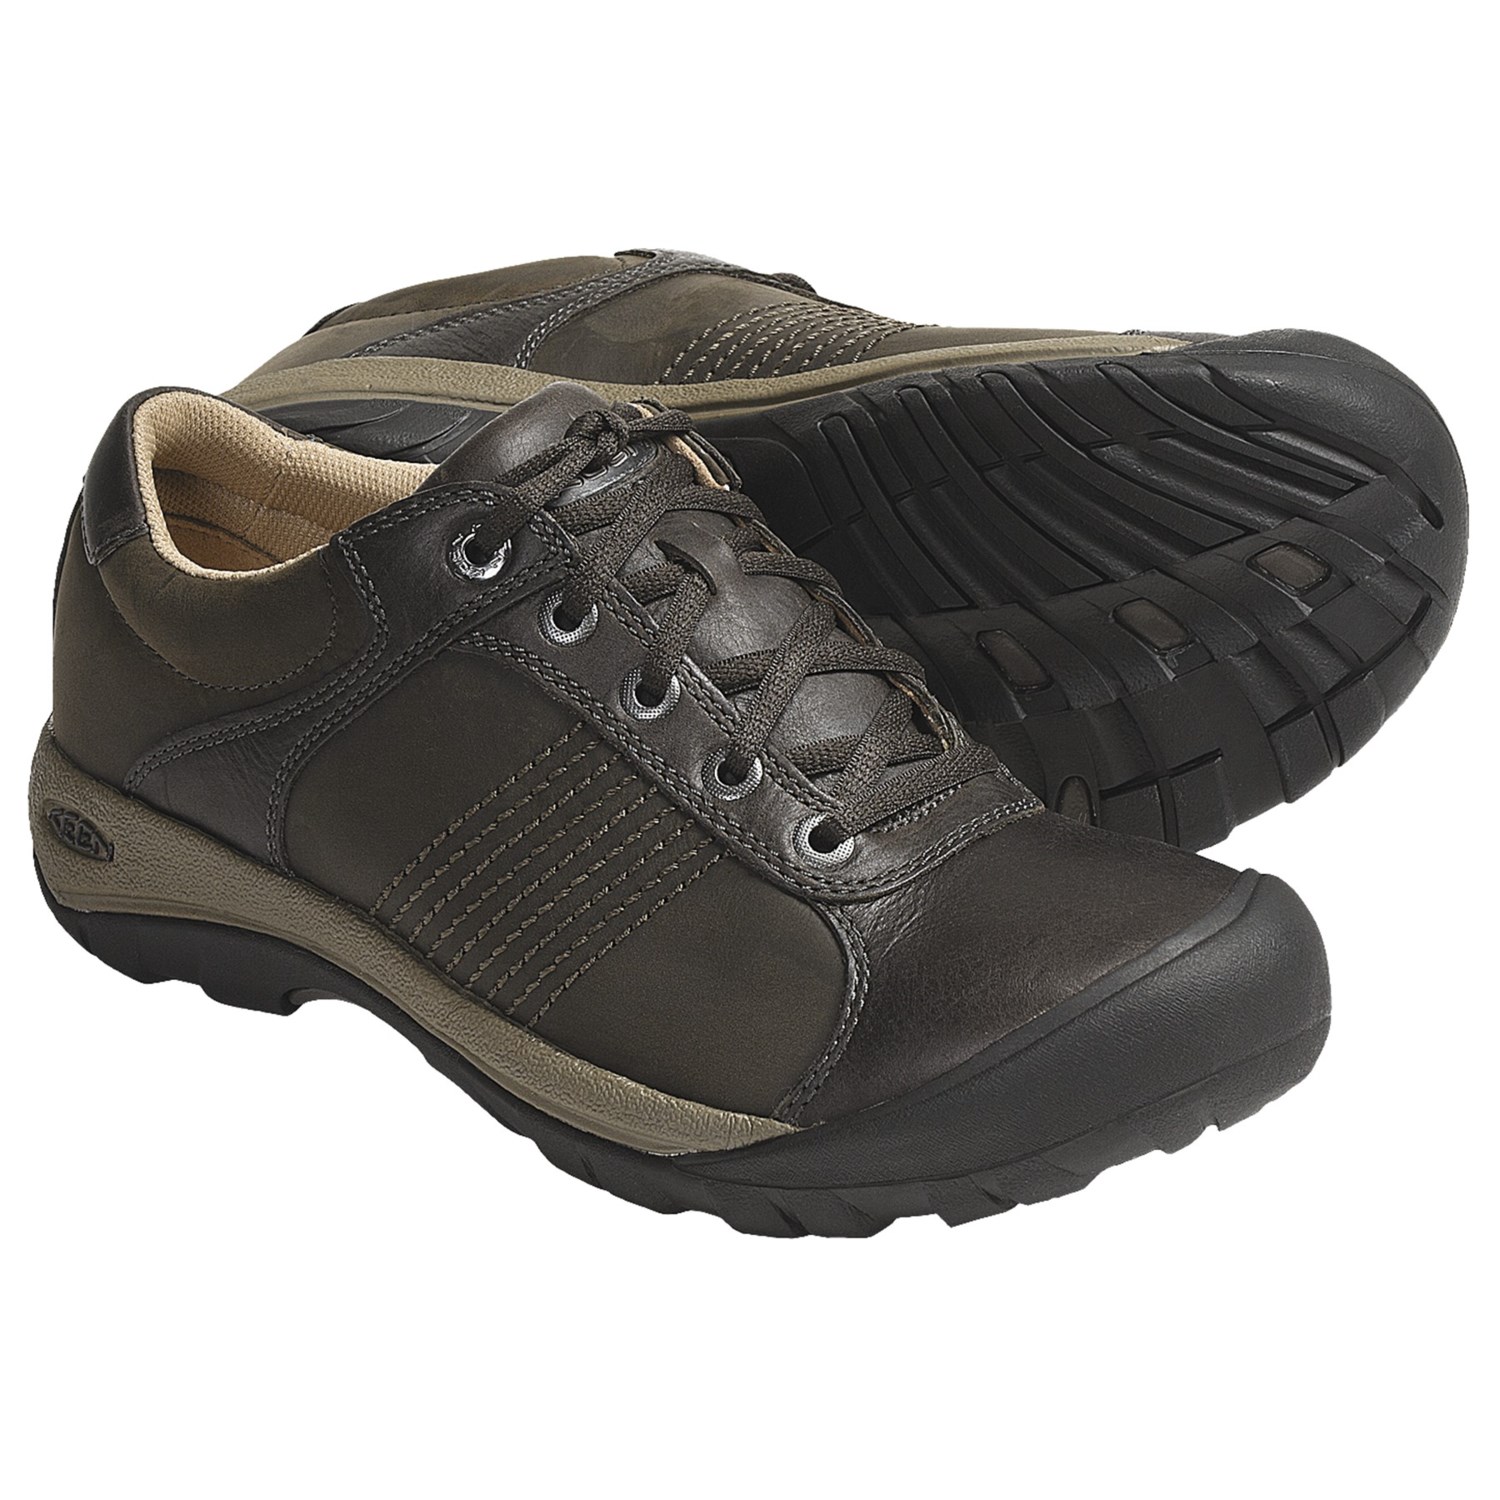 Keen Finlay Shoes (For Men) 4688X - Save 71%